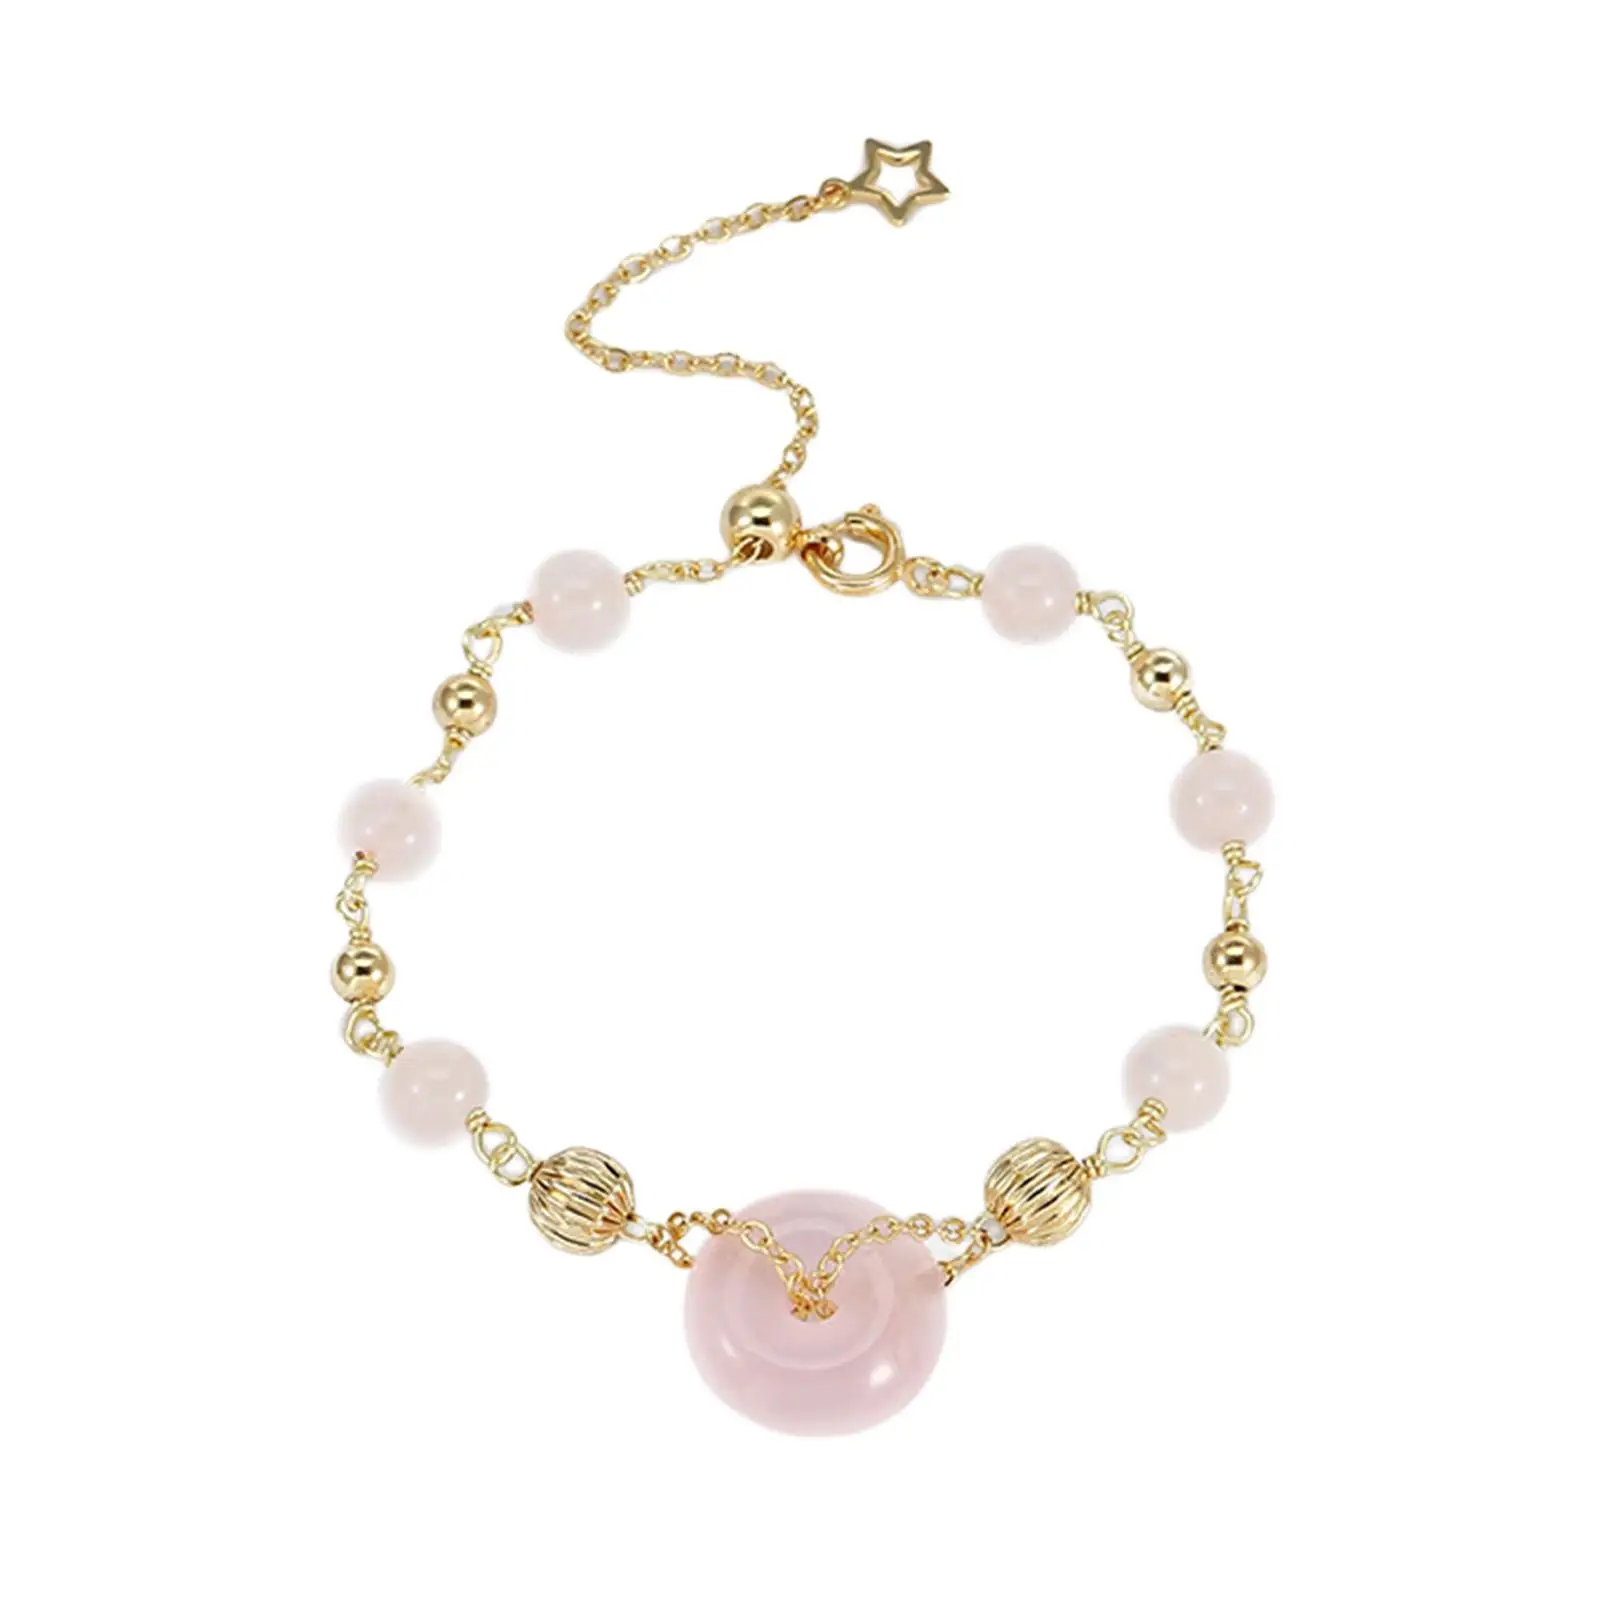 Elegant Pink Beads Bracelet Decorative Delicate Jewelry Charm Beaded Bangle for Girls Women Wedding Different Ages Daily wearing